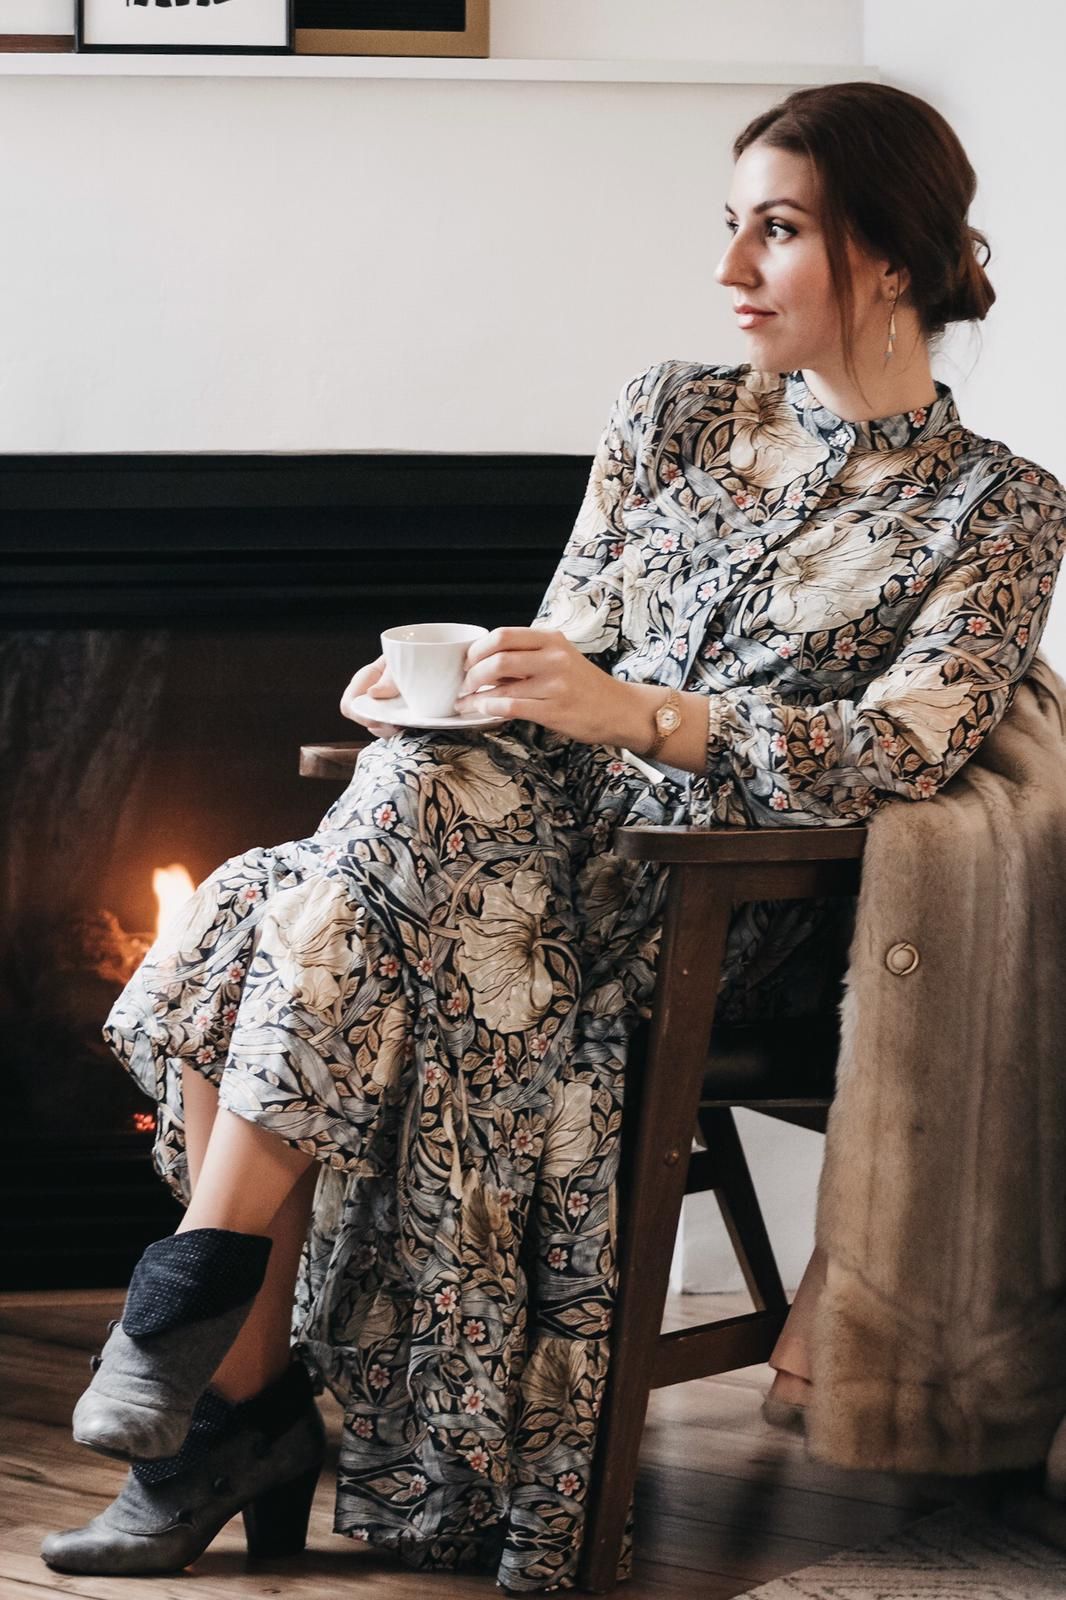 Author of lifestyle blog sitting by fireplace with a cup of coffee wearing a floral dress.